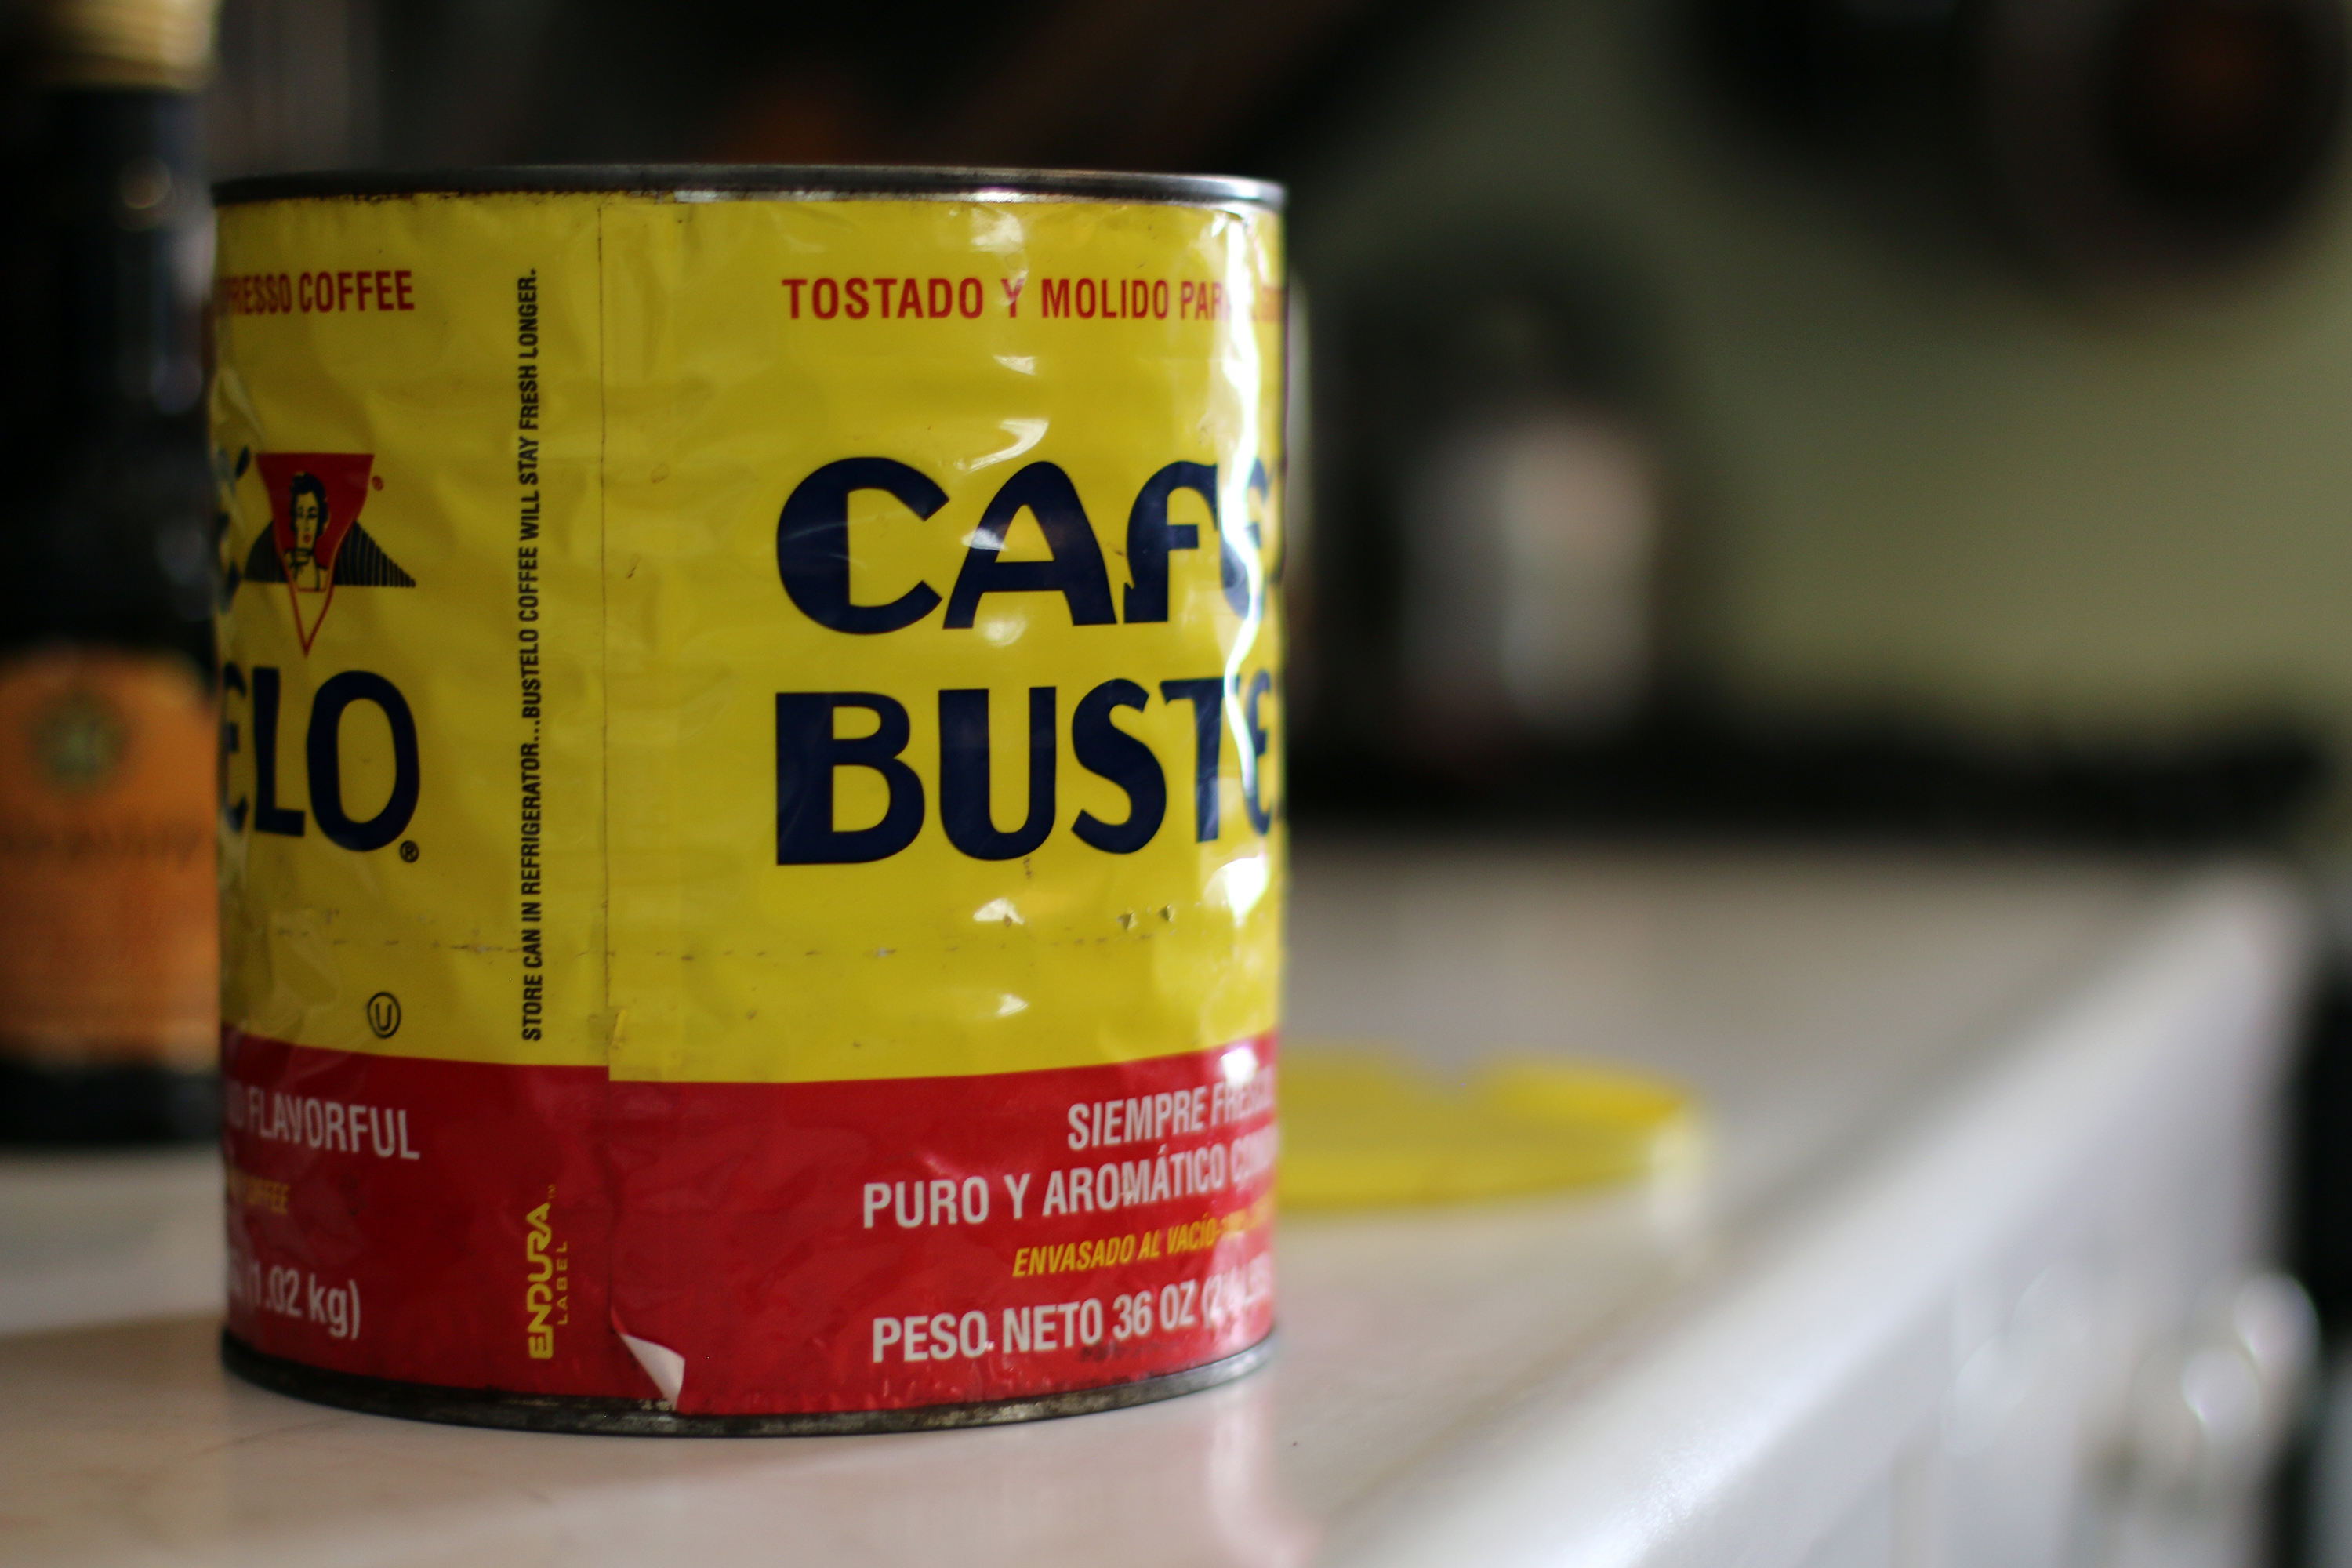 A can of Cafe Bustelo on the kitchen counter in John King's apartment.